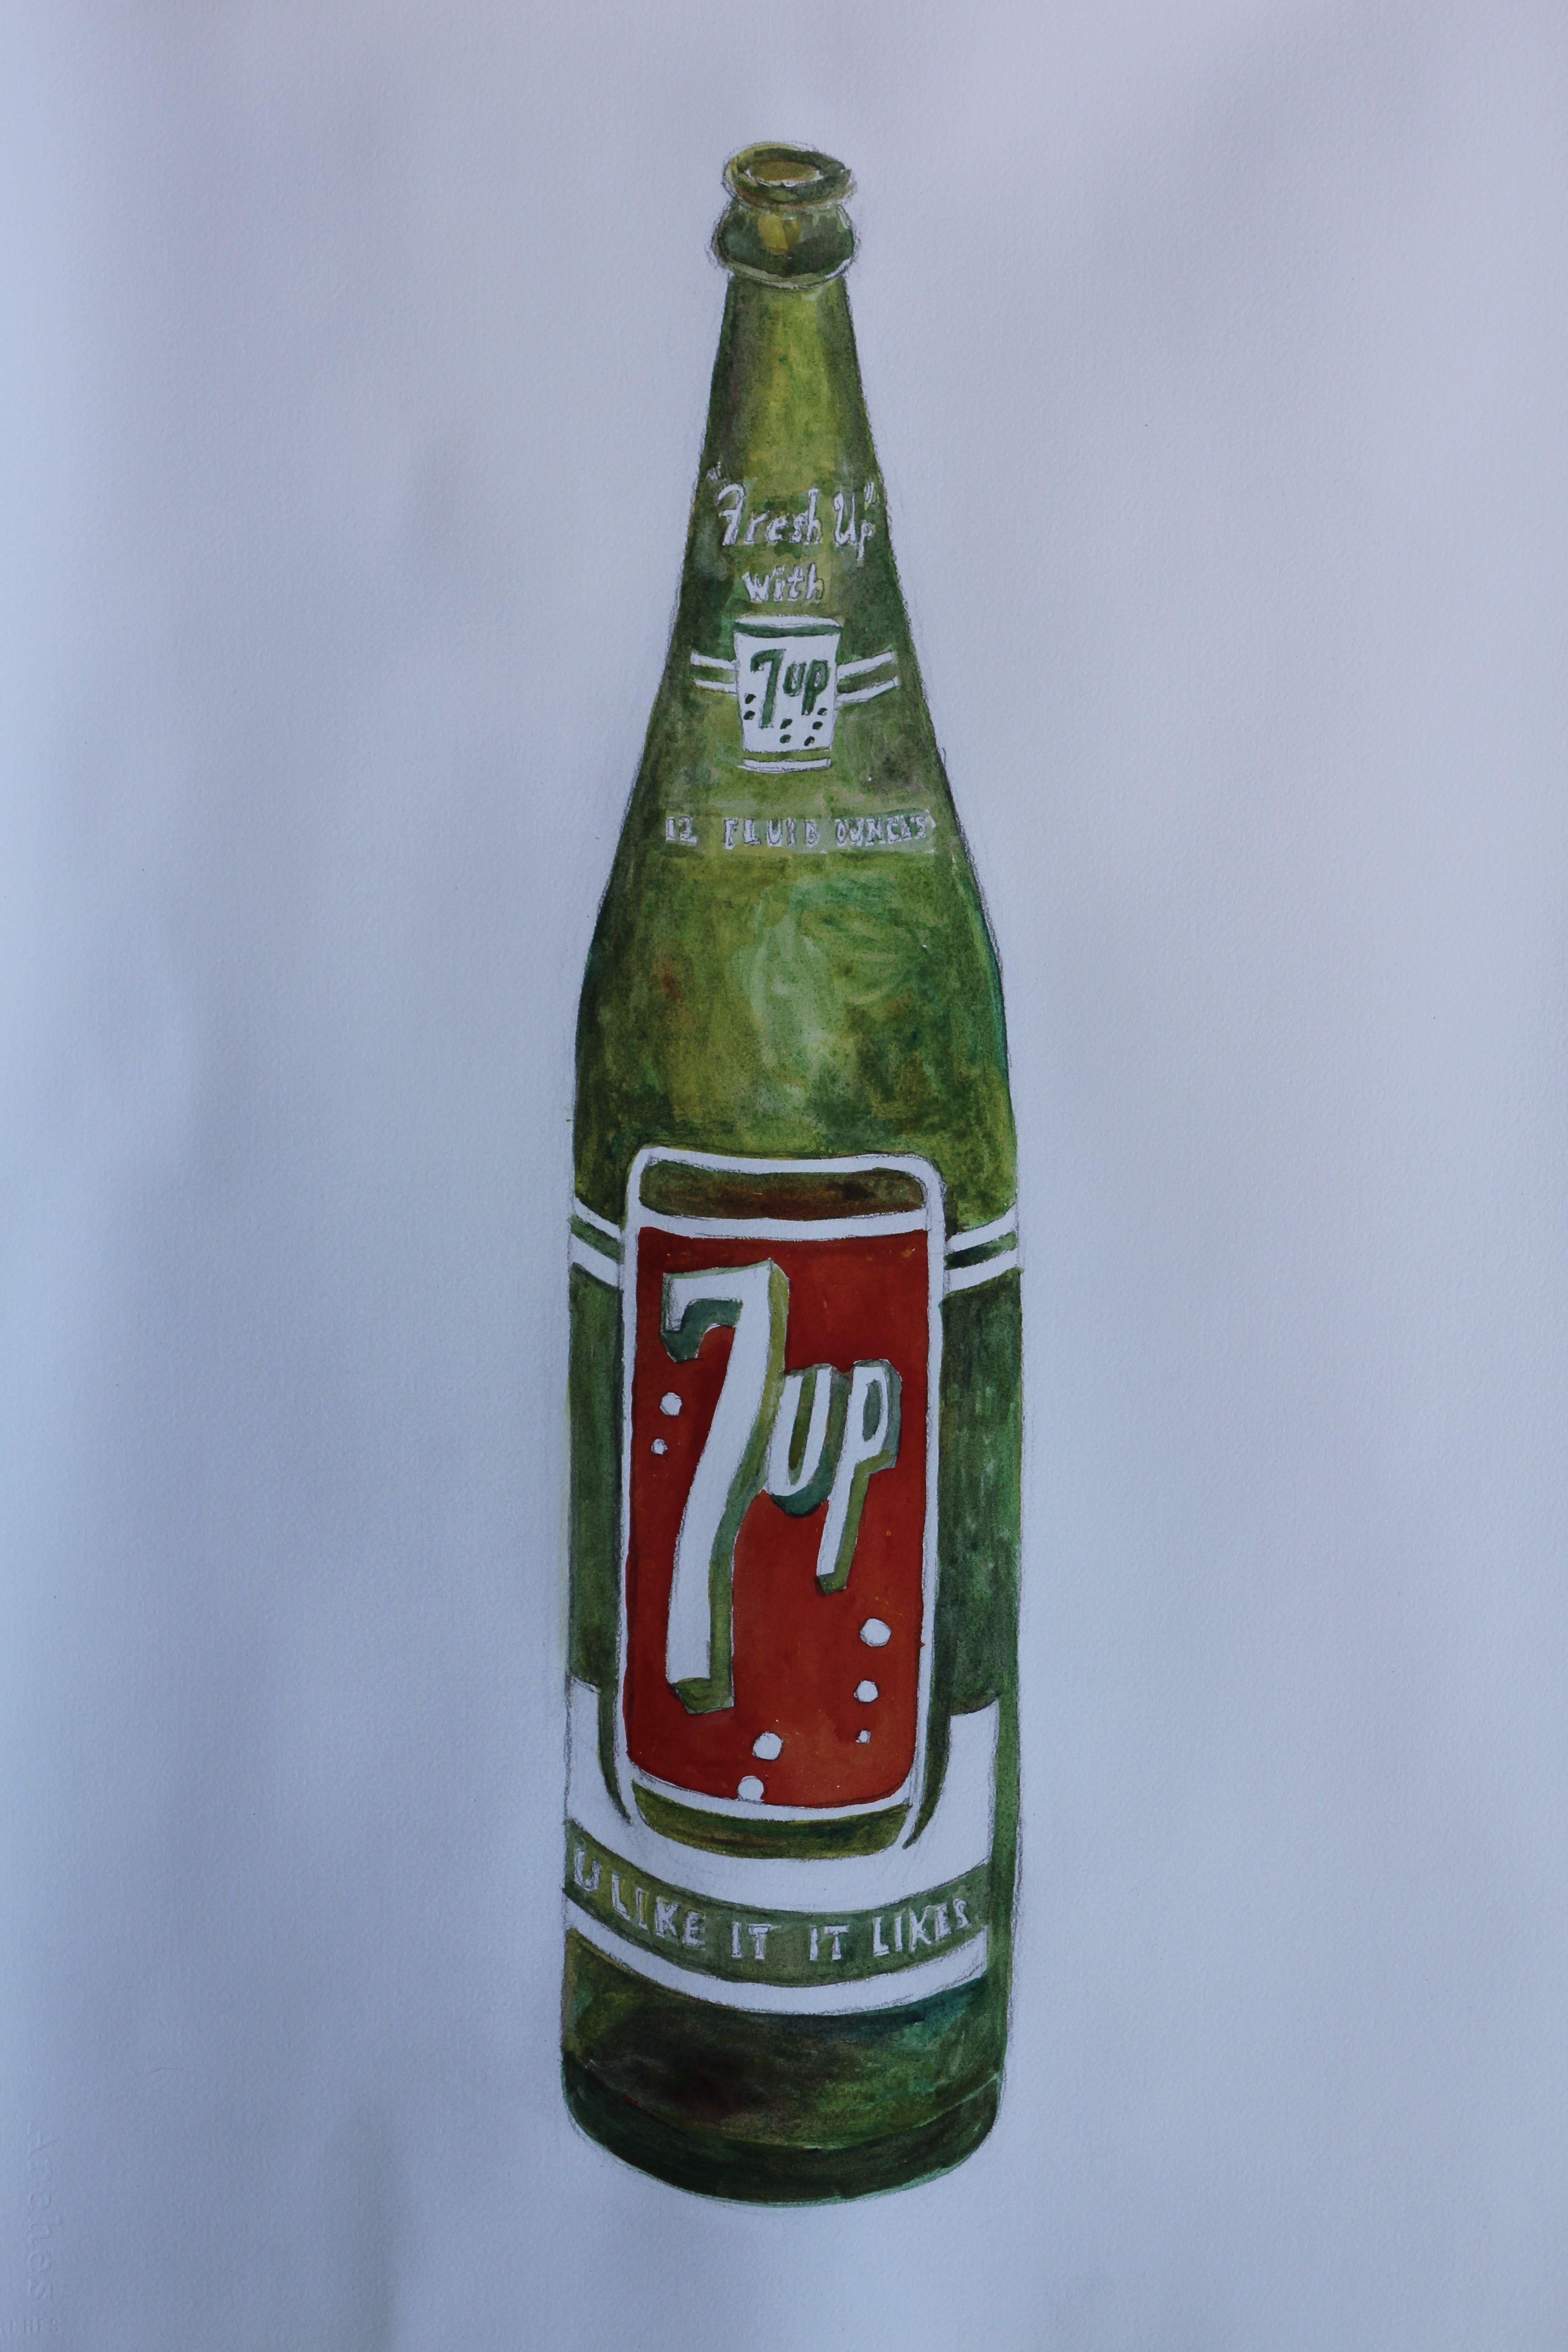 7-up bottle, Painting, Watercolor on Paper - Art by John Kilduff